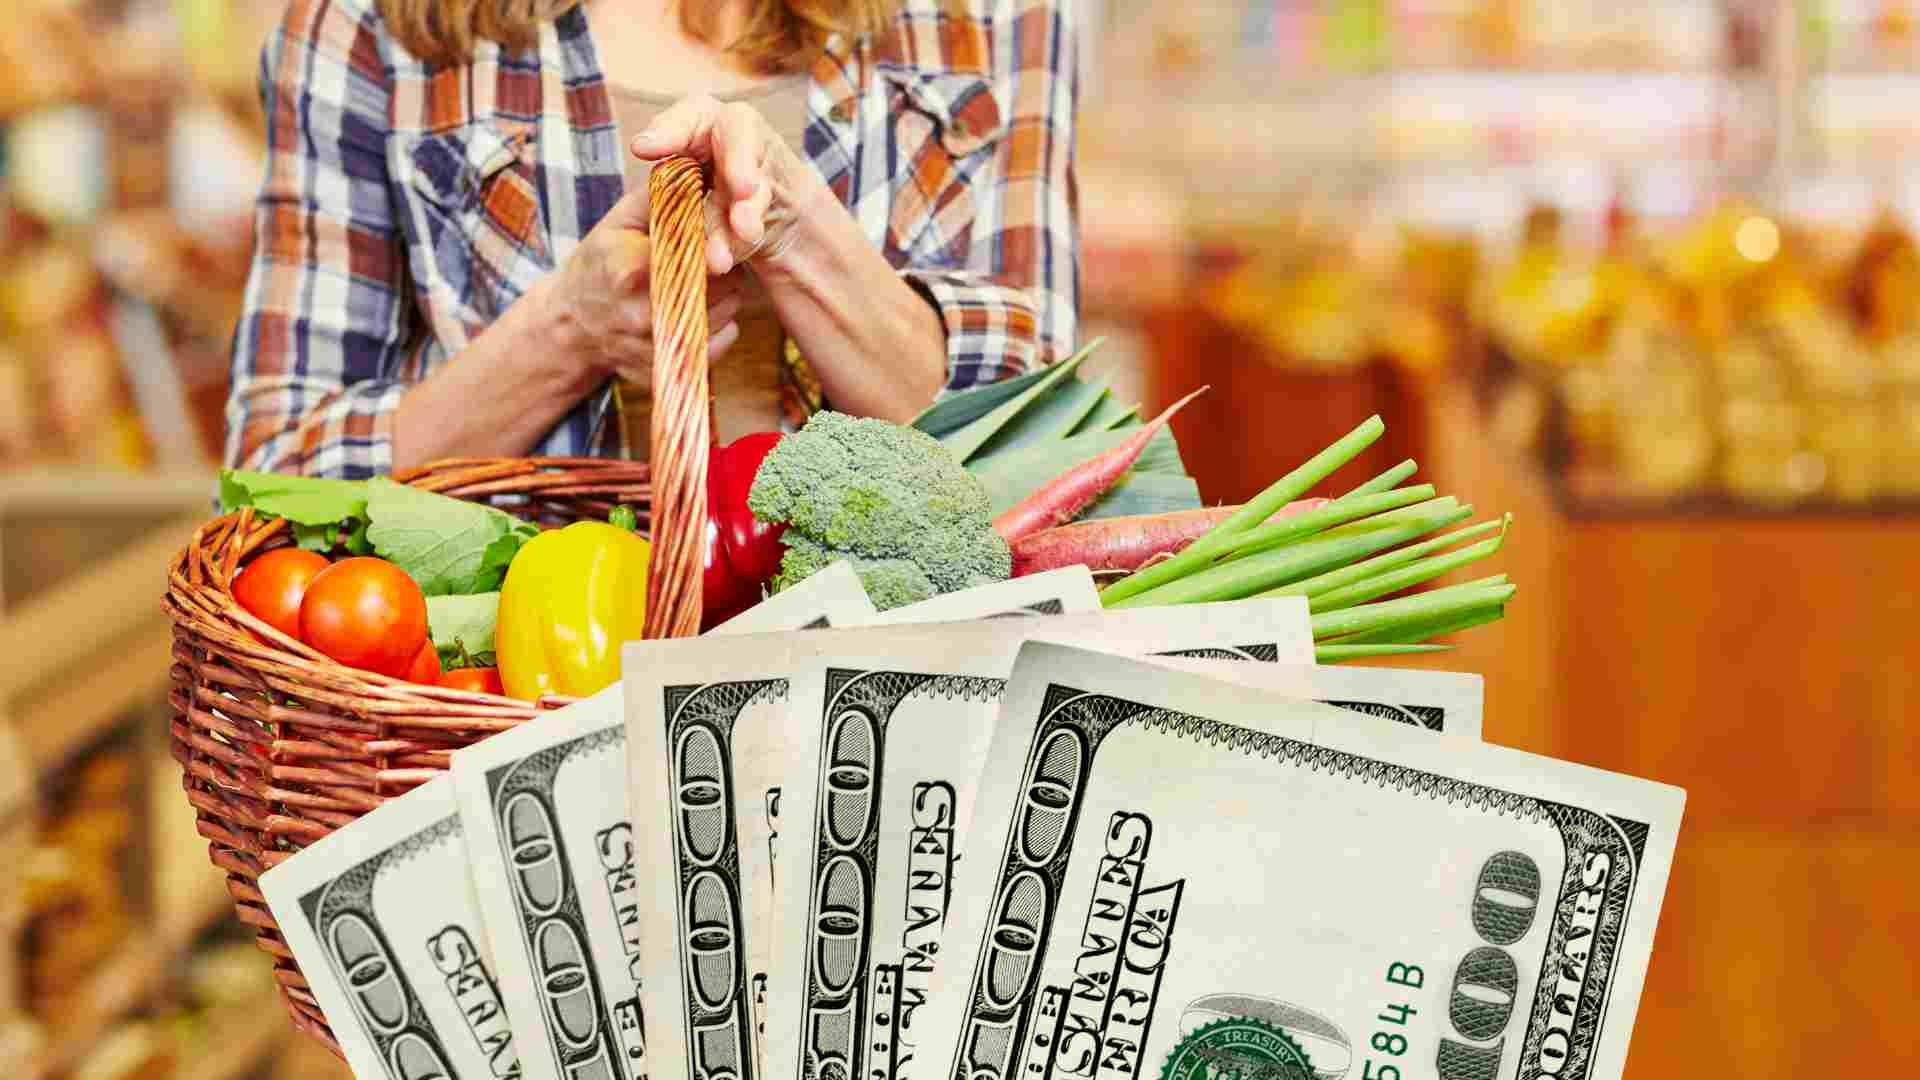 Next week will bring money for eligible SNAP beneficiaries, Food Stamps checks worth up to $1,751 in the USA